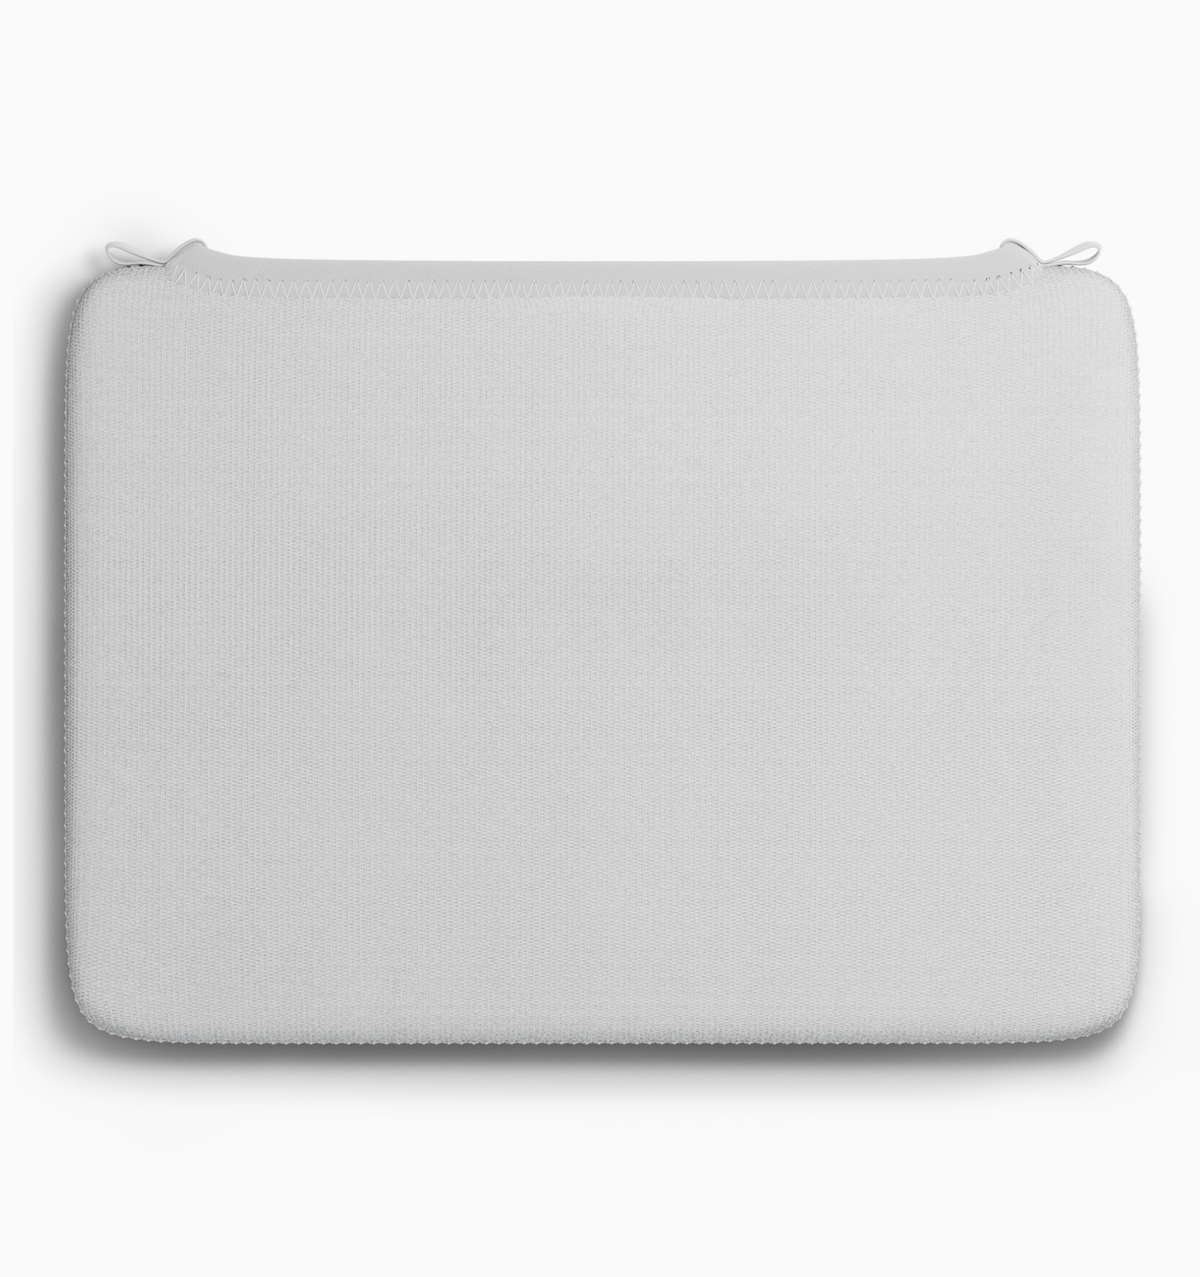 Rushfaster Laptop Sleeve For 13" MacBook Air/Pro - White